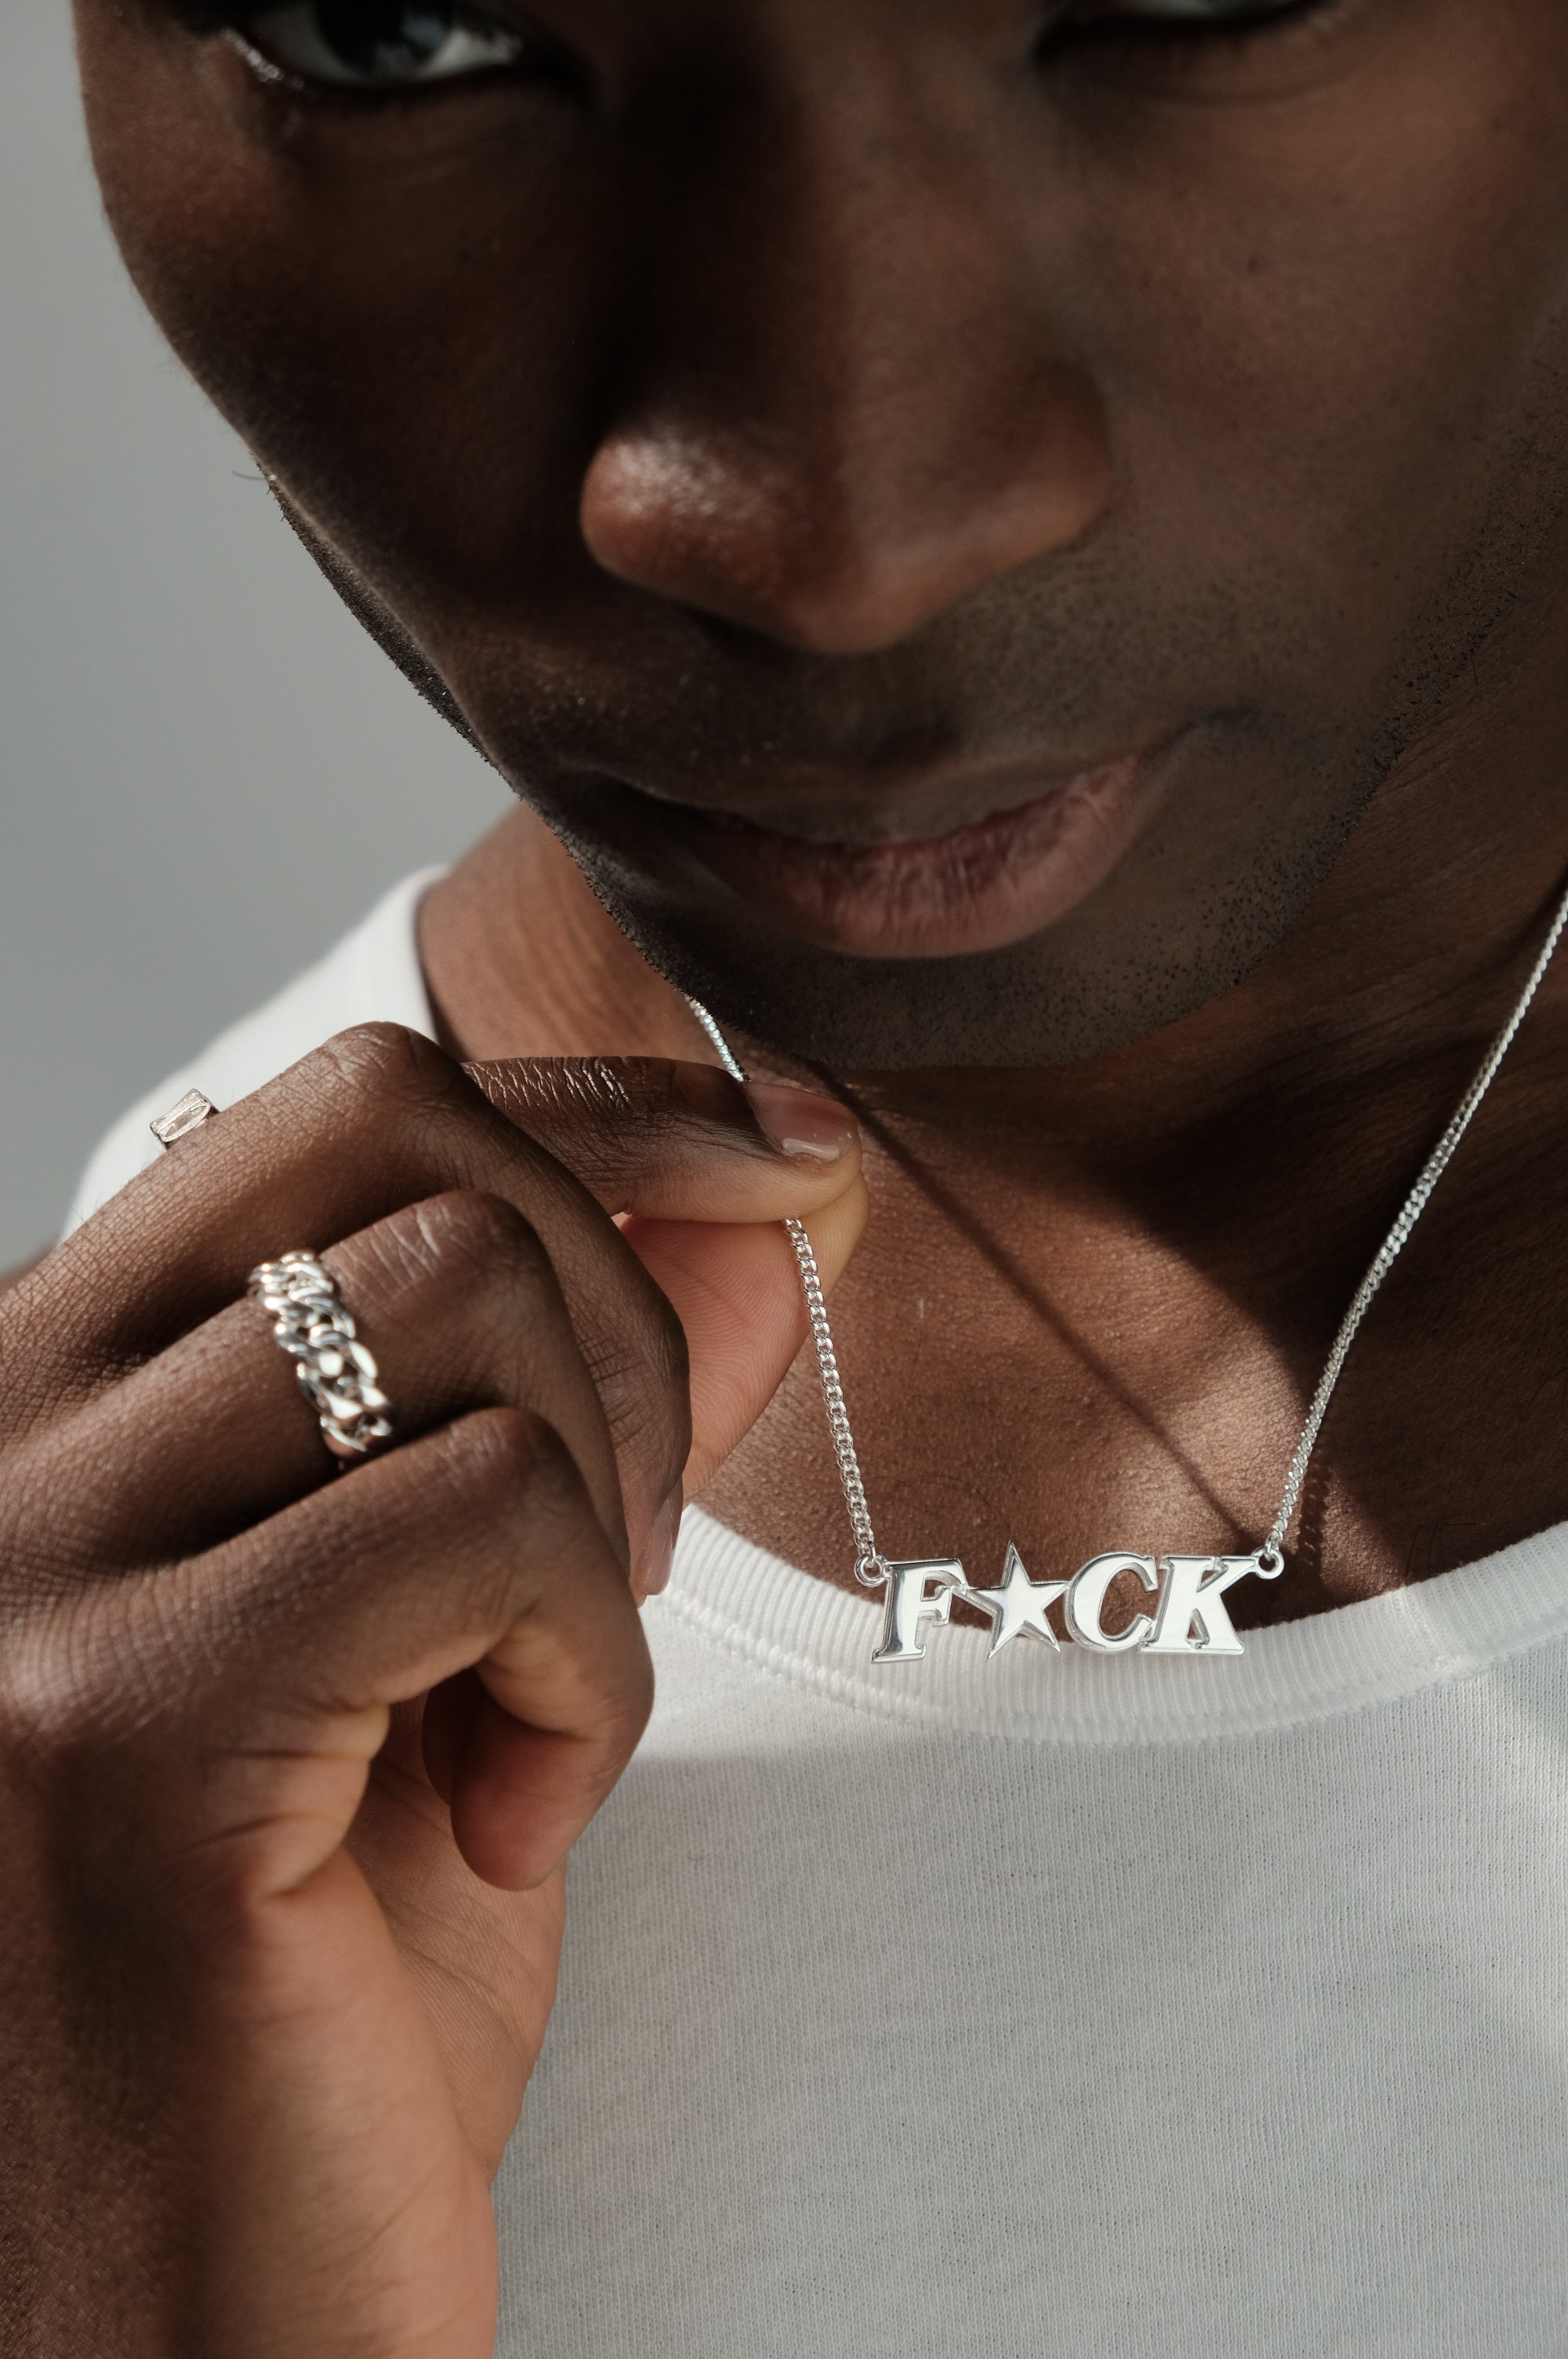 F*CK Necklace - Silver